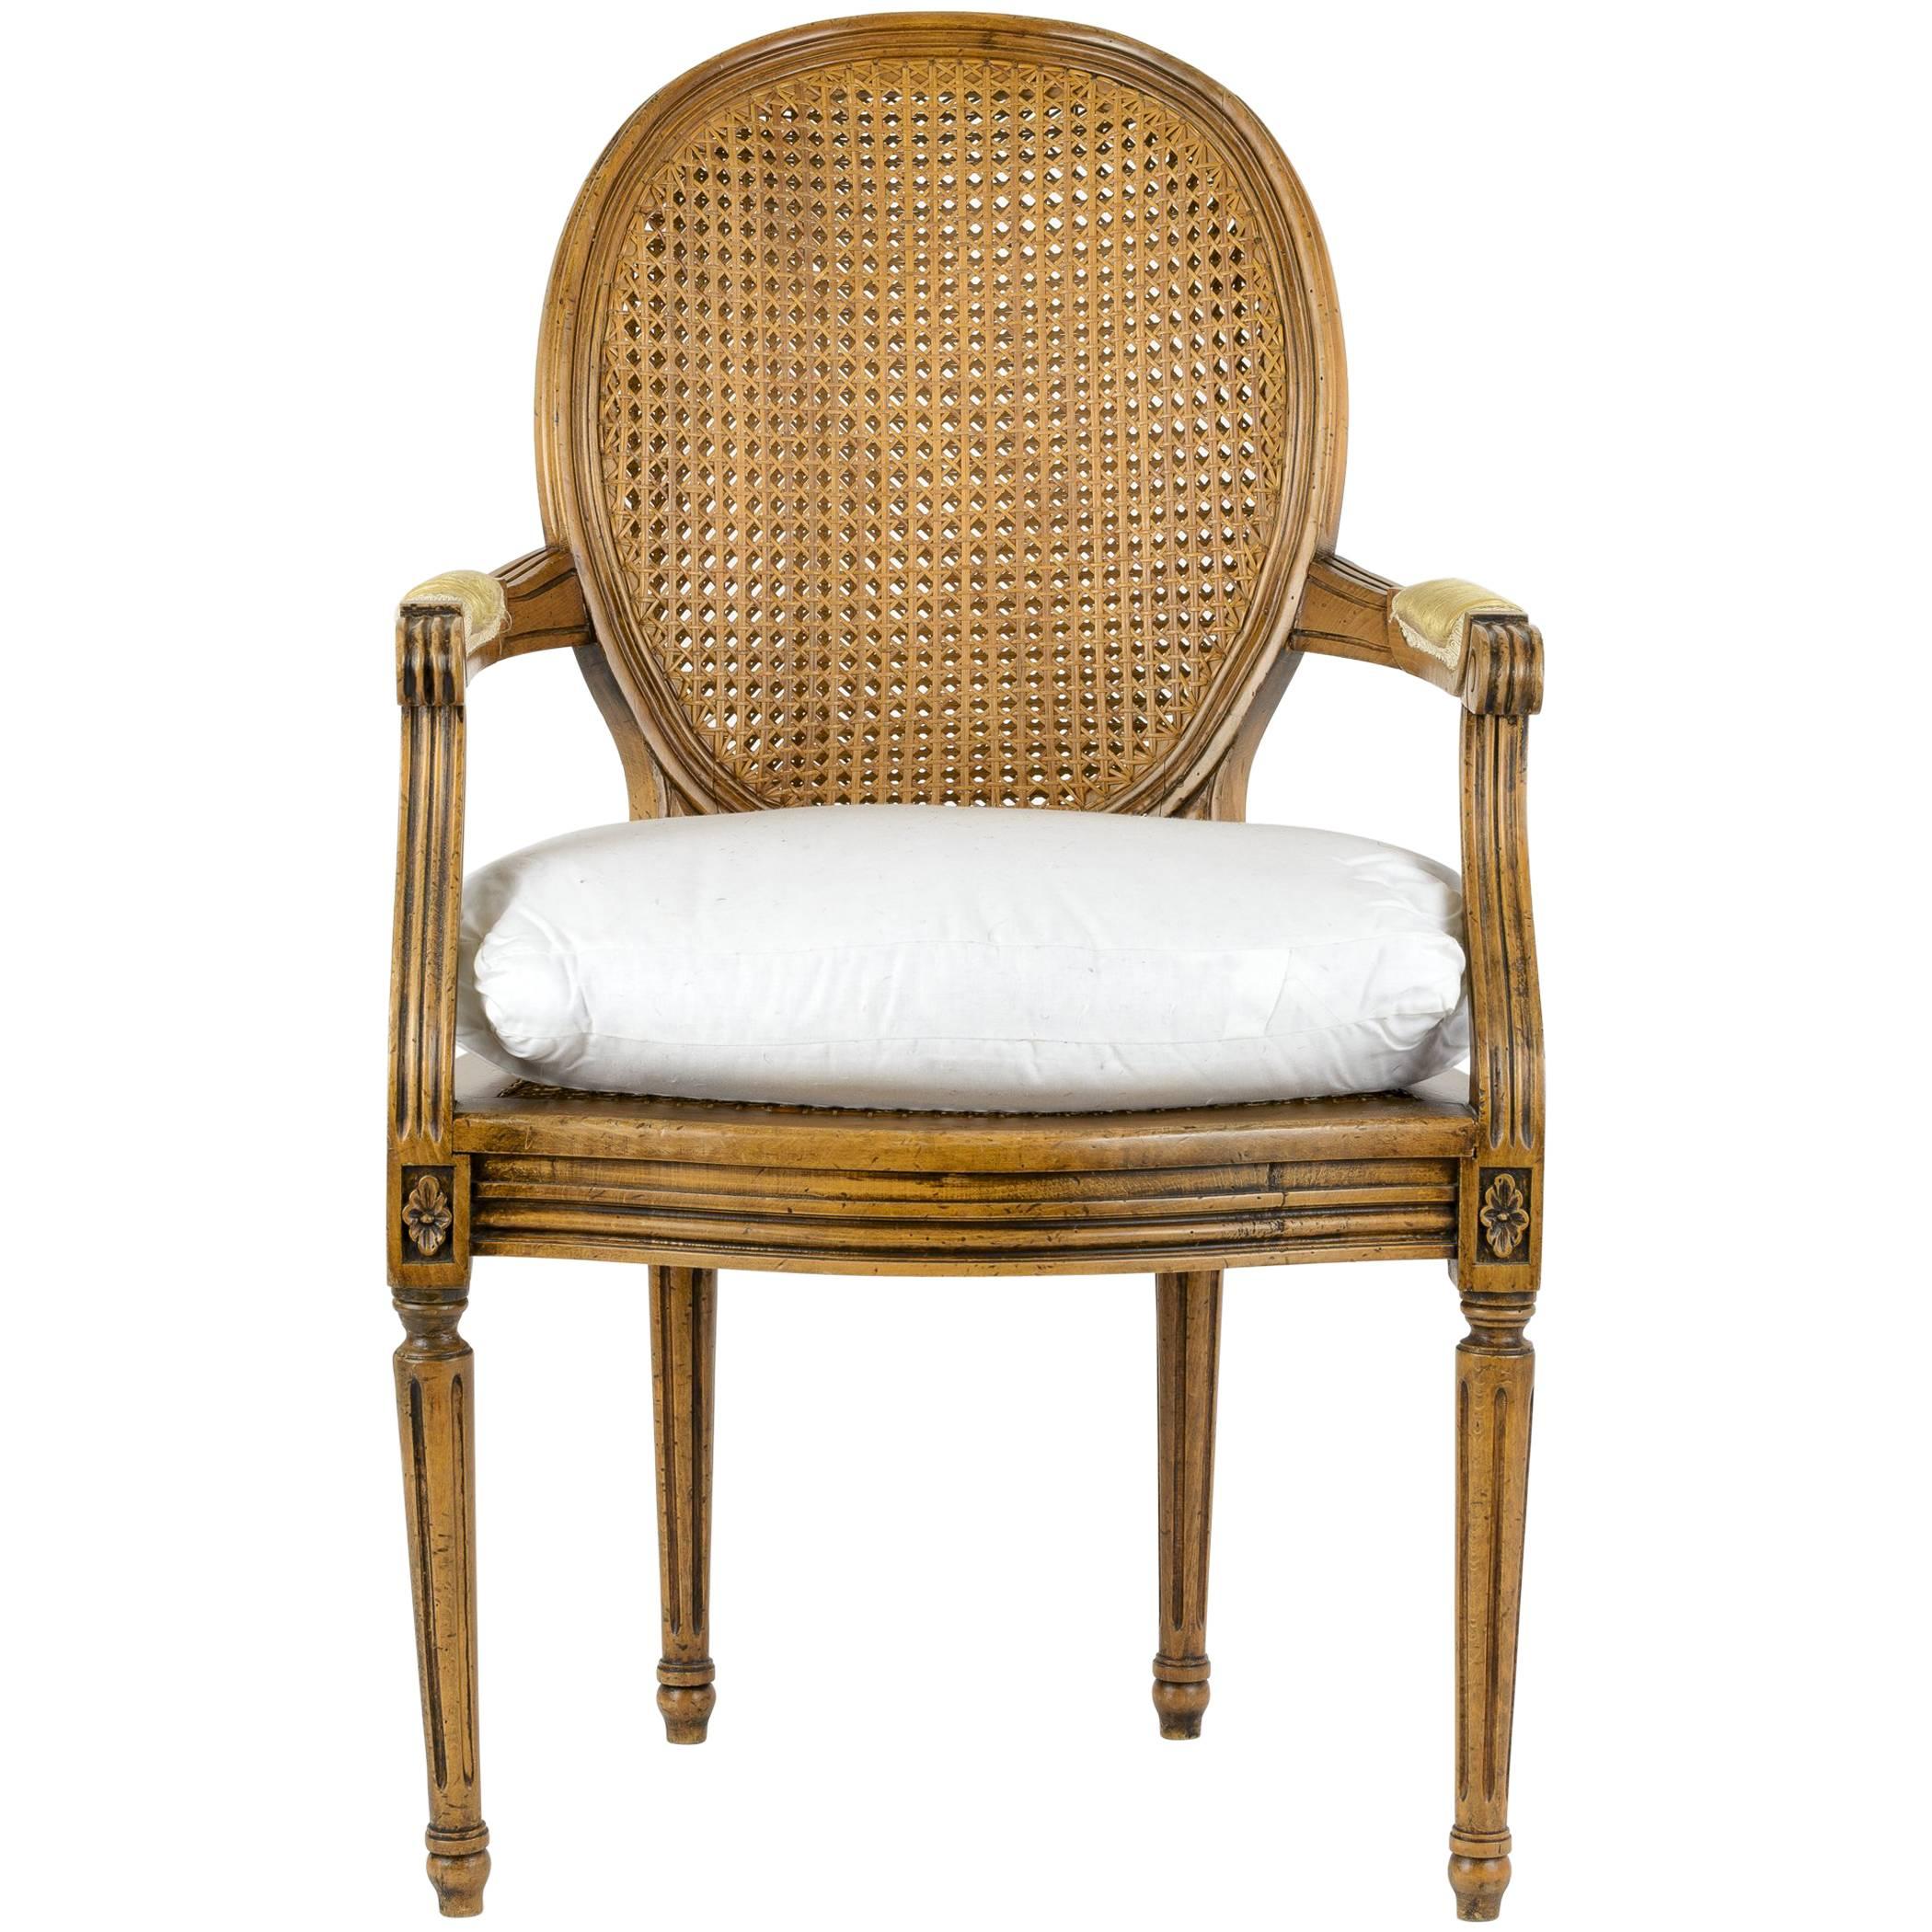 Louis XVI Armchair with Cane Back and Seat